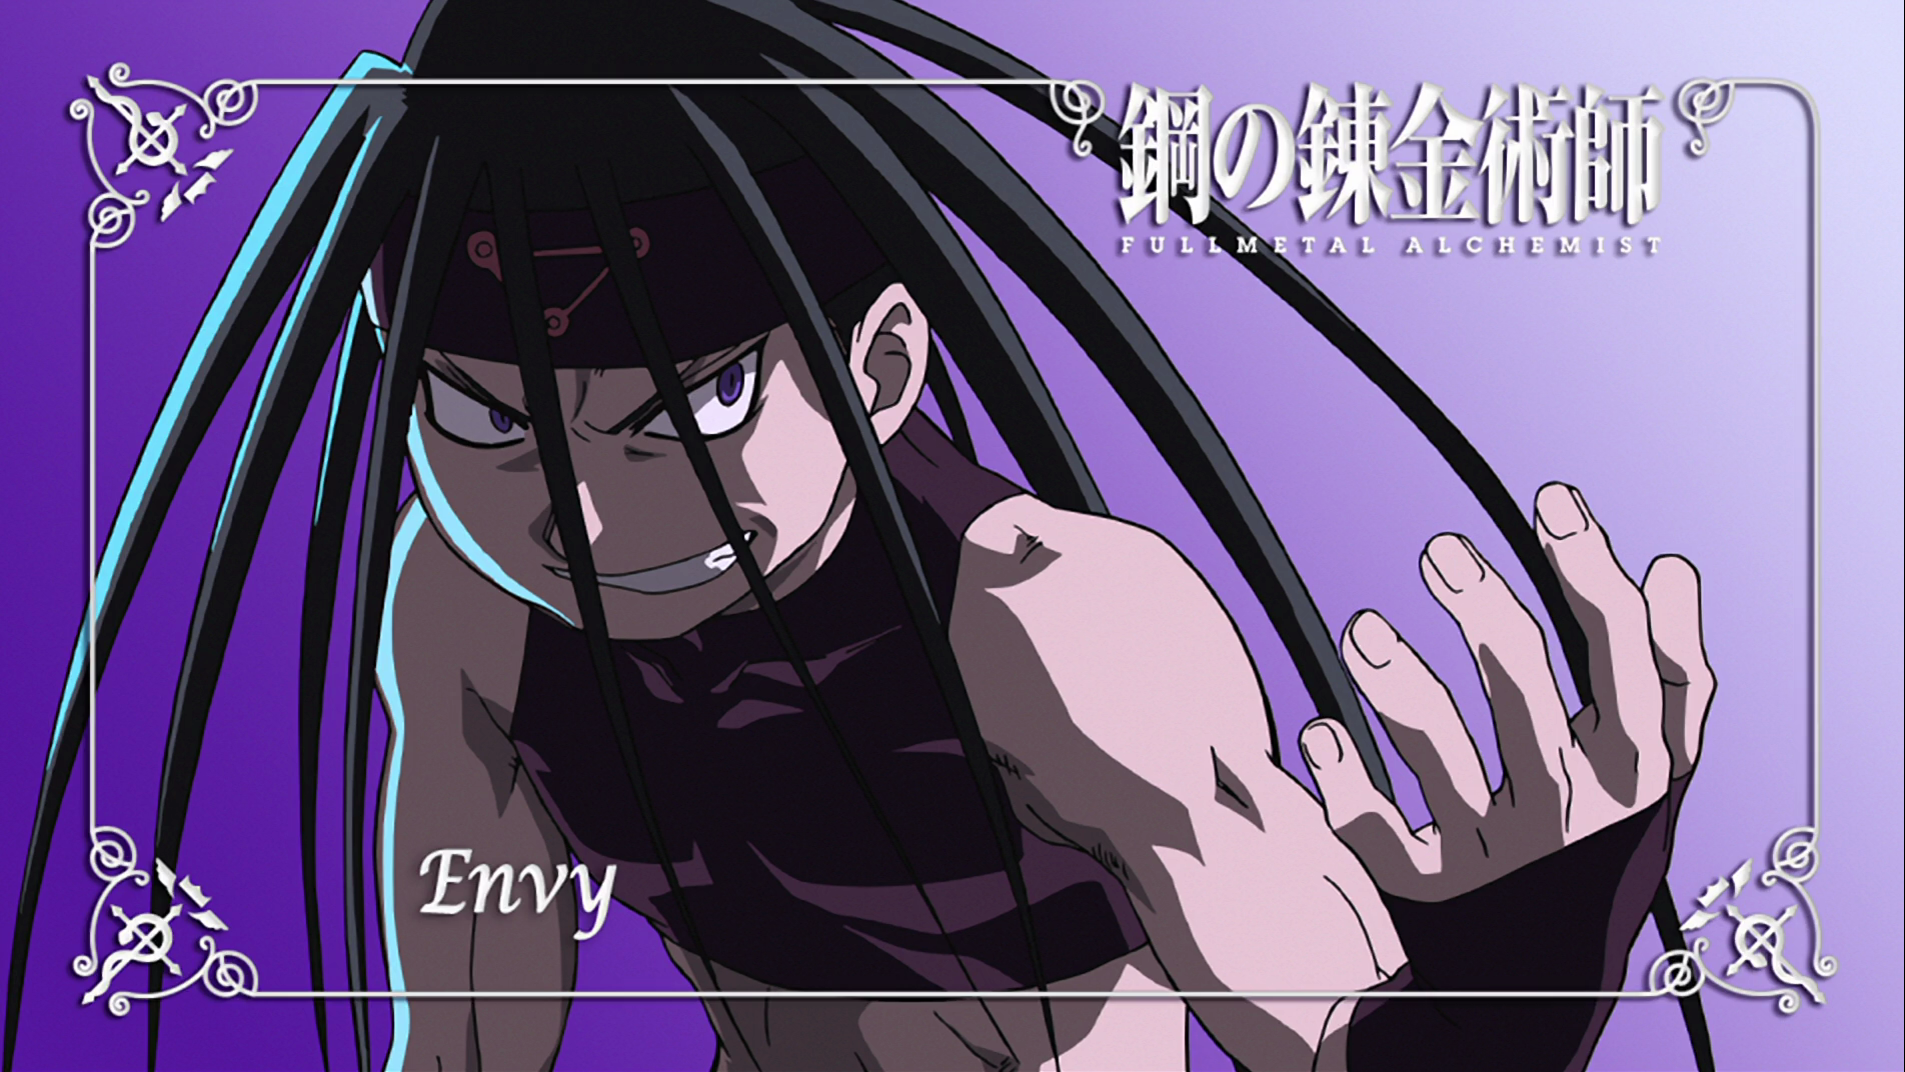 Envy, the deadly sin in 